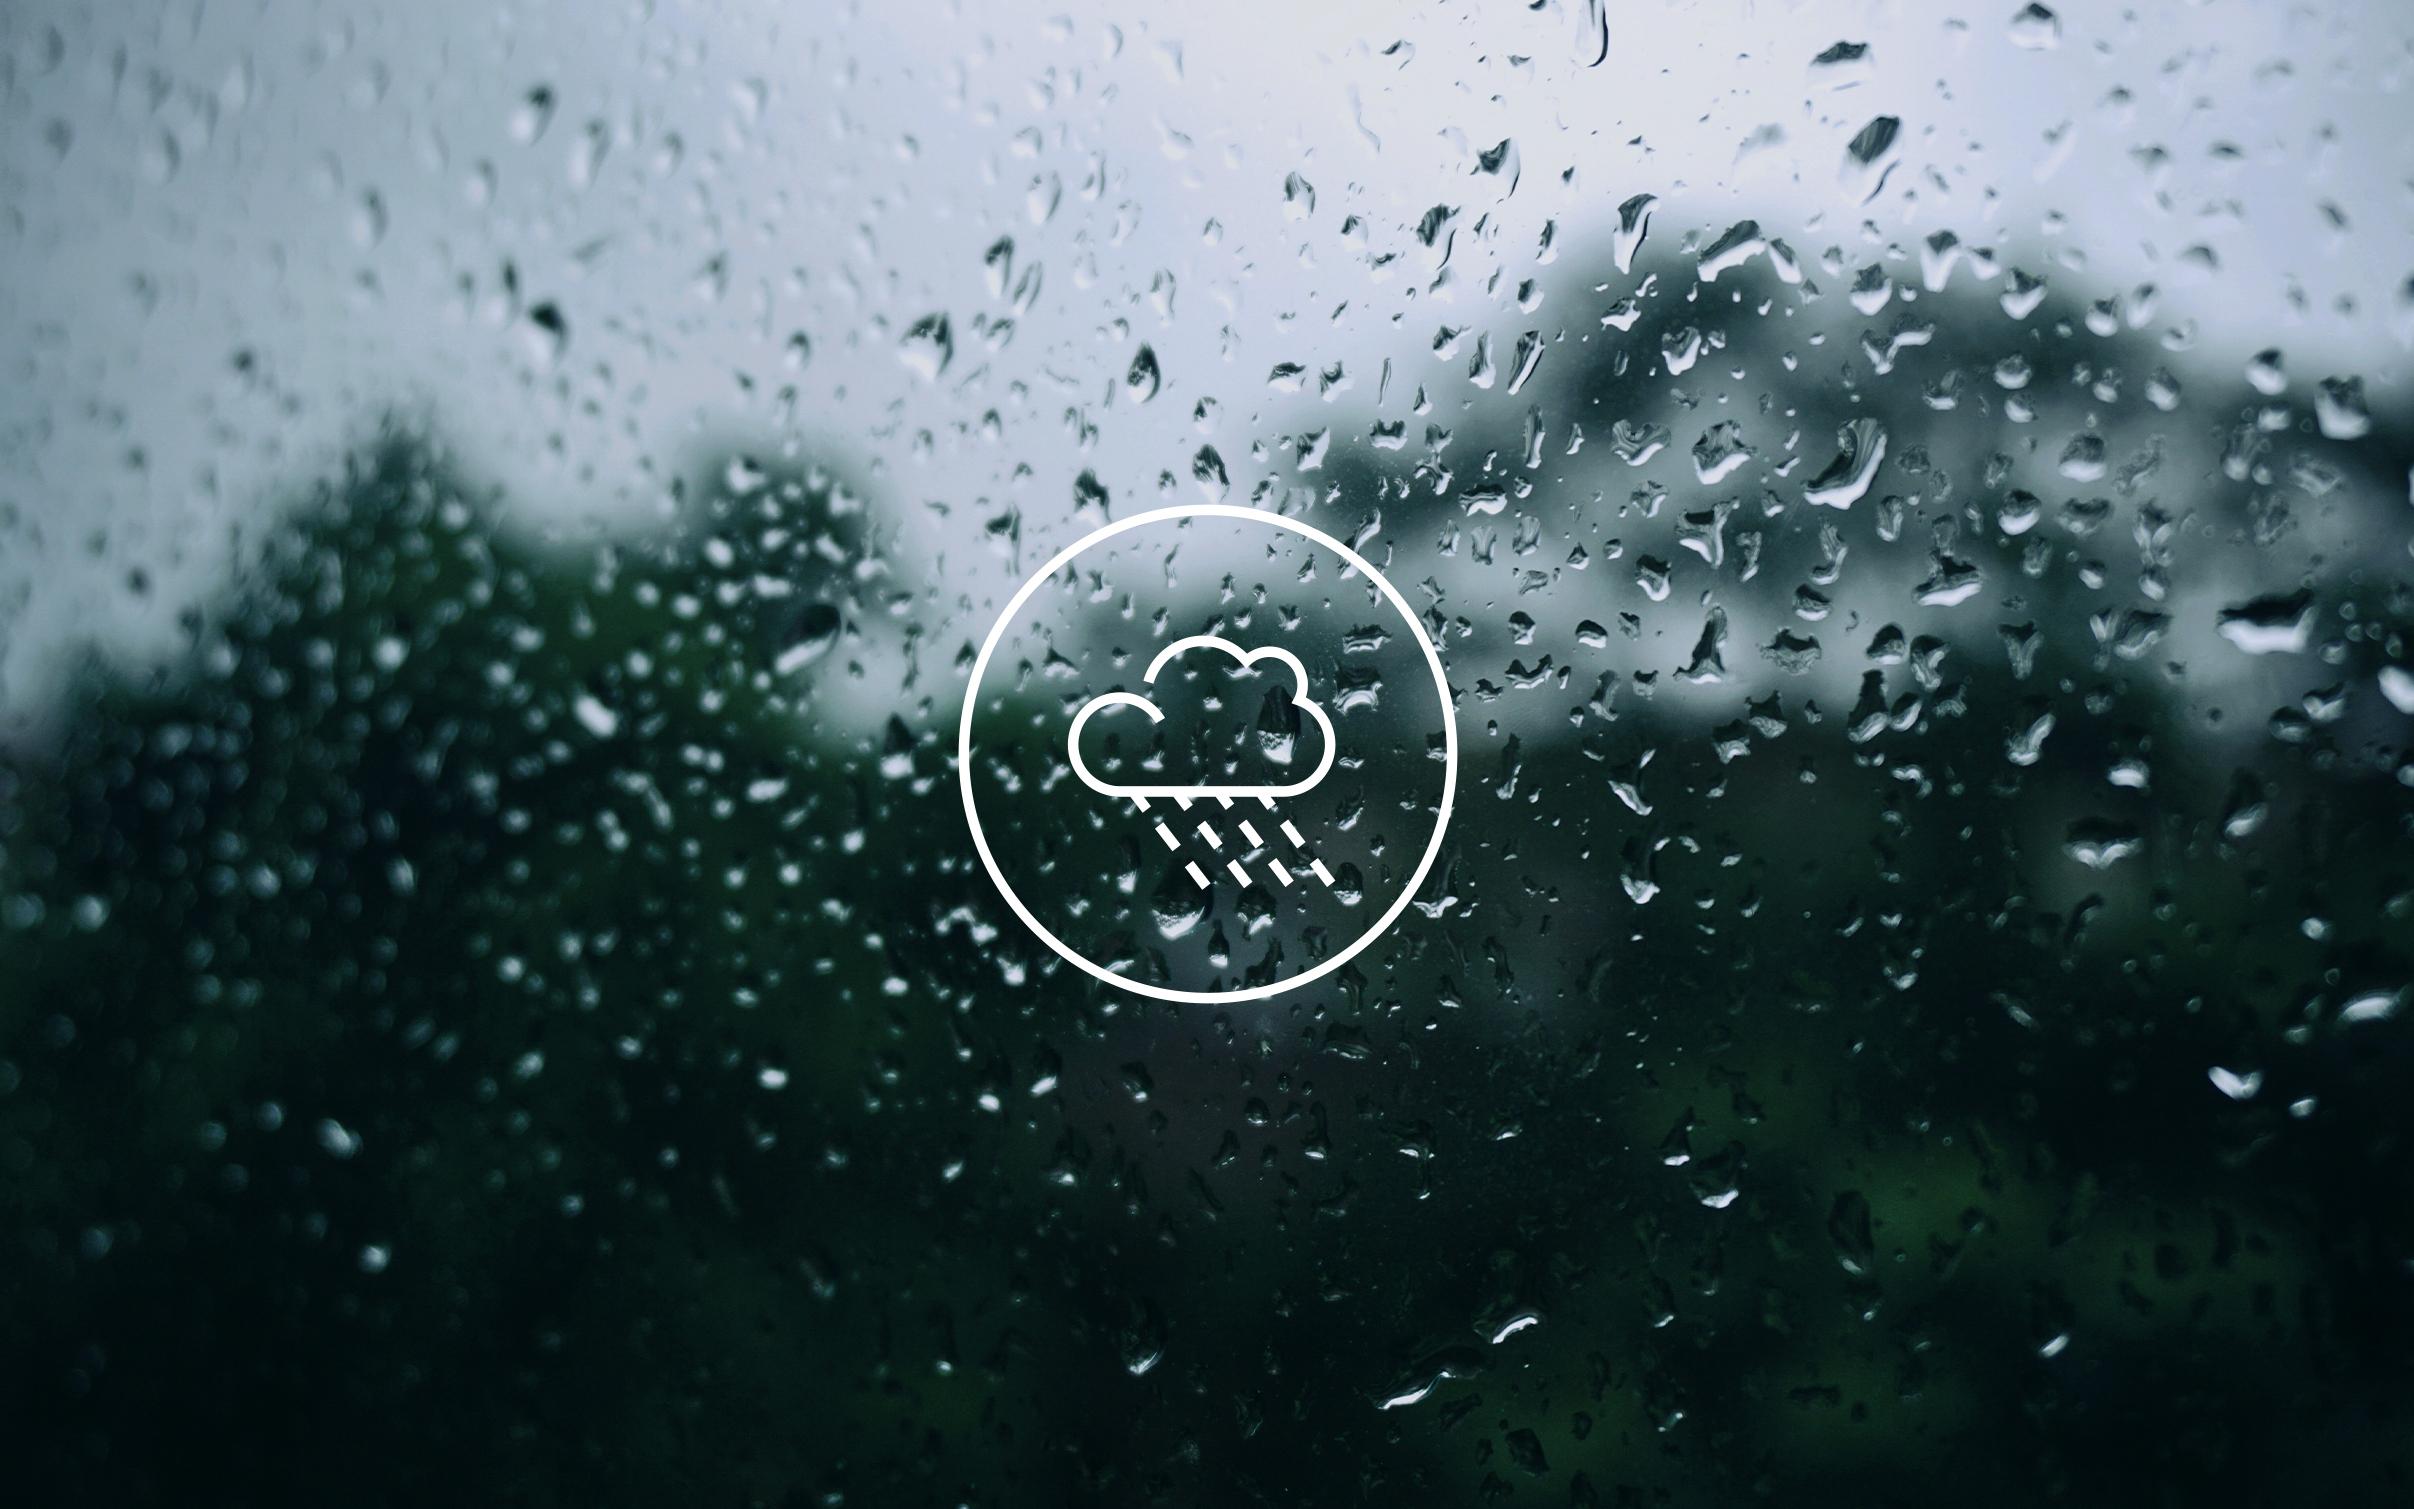 Icon on Picture rainy cloud small